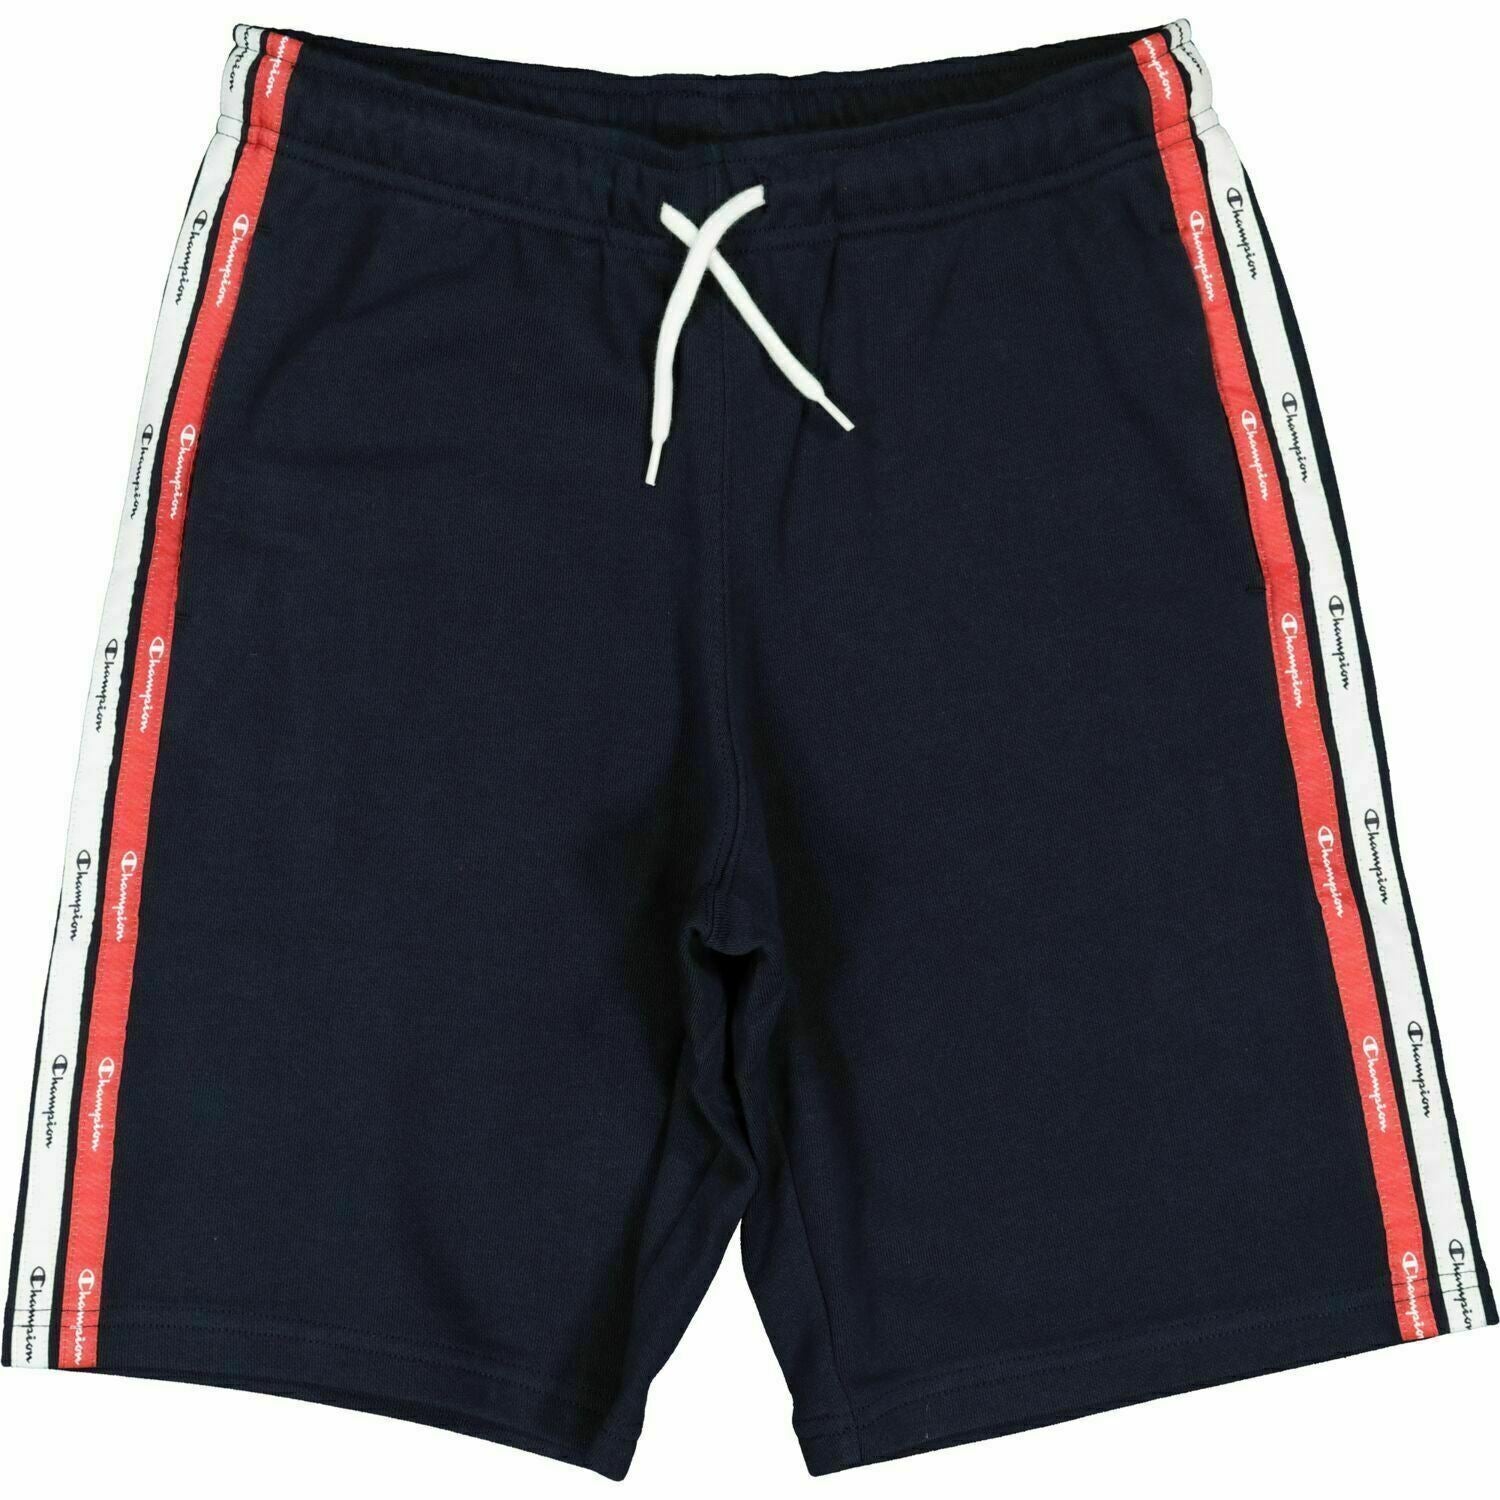 CHAMPION Boys' Sweat Shorts, Navy Blue / Side Tape, 5 years to 6 years